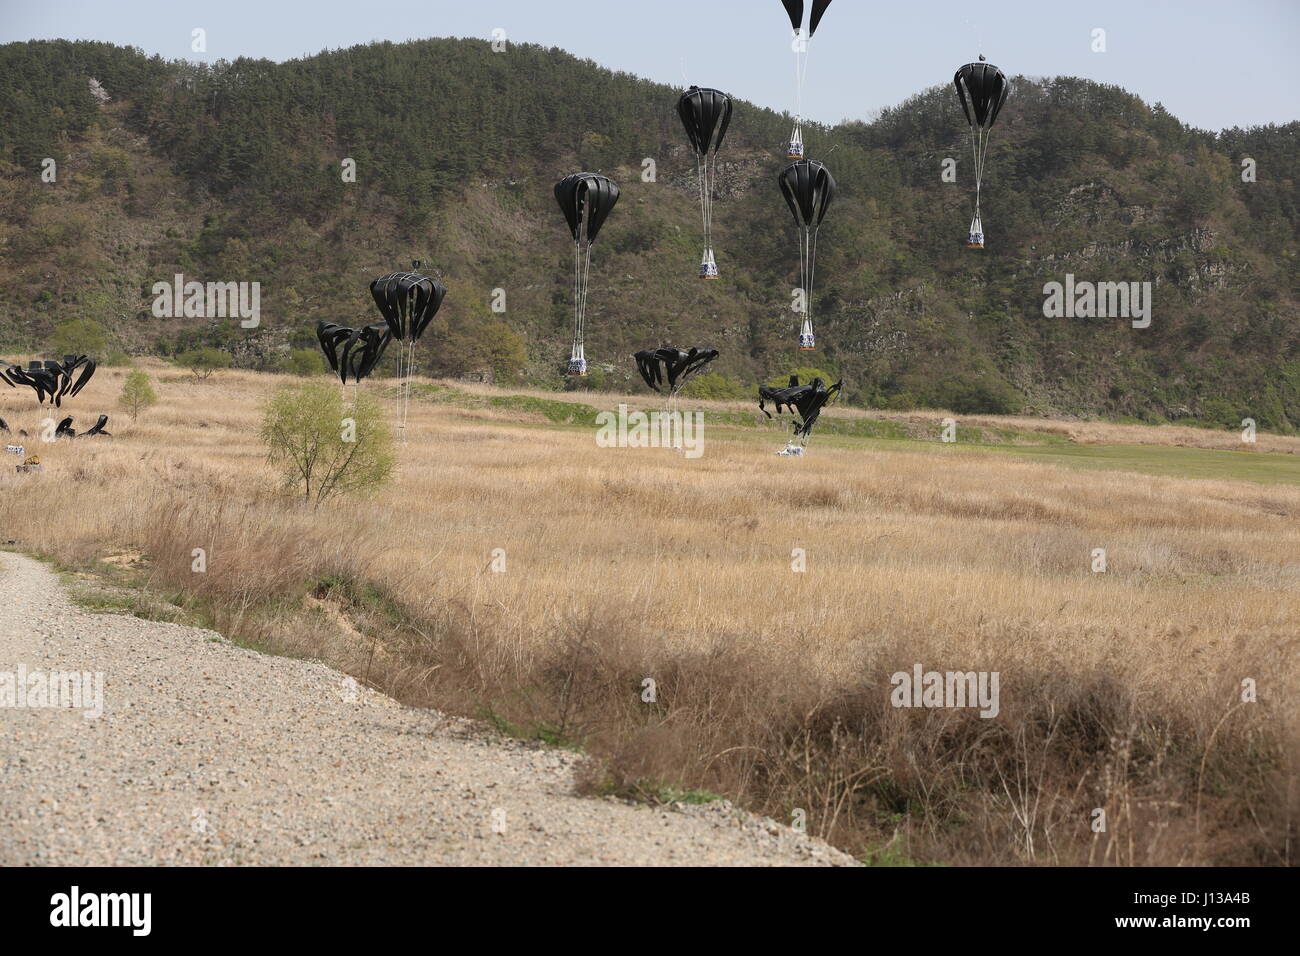 Low cost aerial delivery systems, each loaded with four, 55-gallon drums of water, reach the ground after being dropped from a Republic of Korea Air Force C-130, April 12, 2017, into a drop zone between Daegu and Busan, South Korea. ExOPR17 focuses on integrating Republic of Korea and U.S. Alliance logistics capabilities within air, land, maritime, space and information environments. Stock Photo